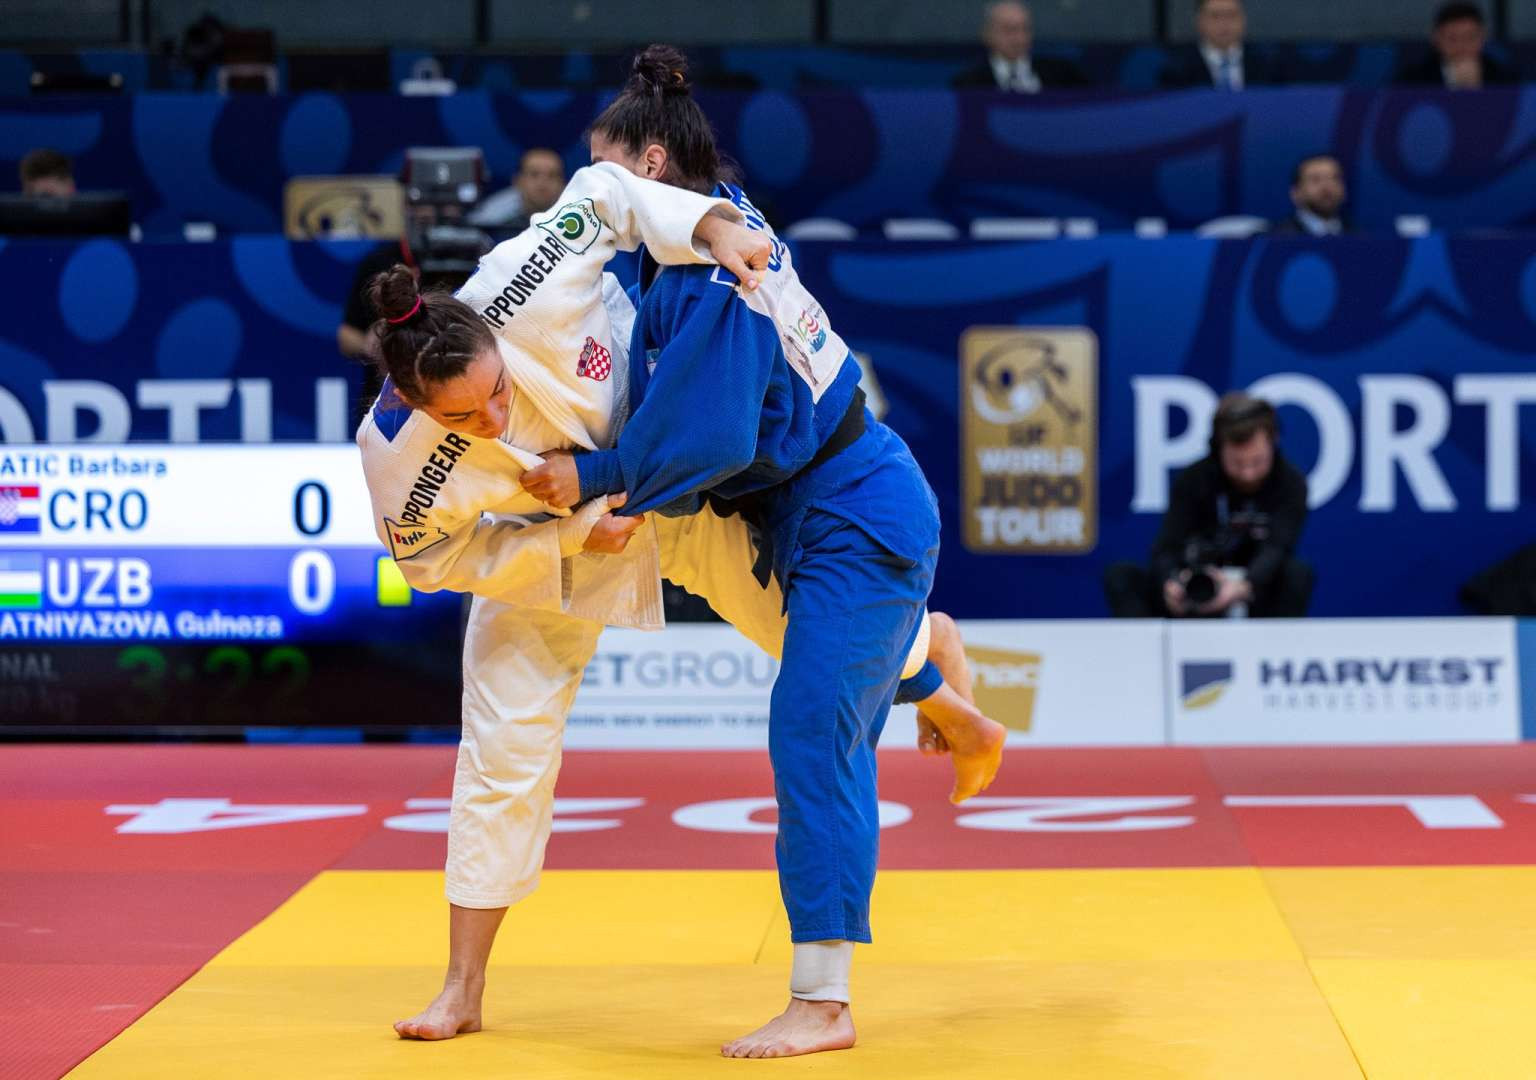 European and Japanese judokas win gold on Day 2 of Portugal Grand Prix 